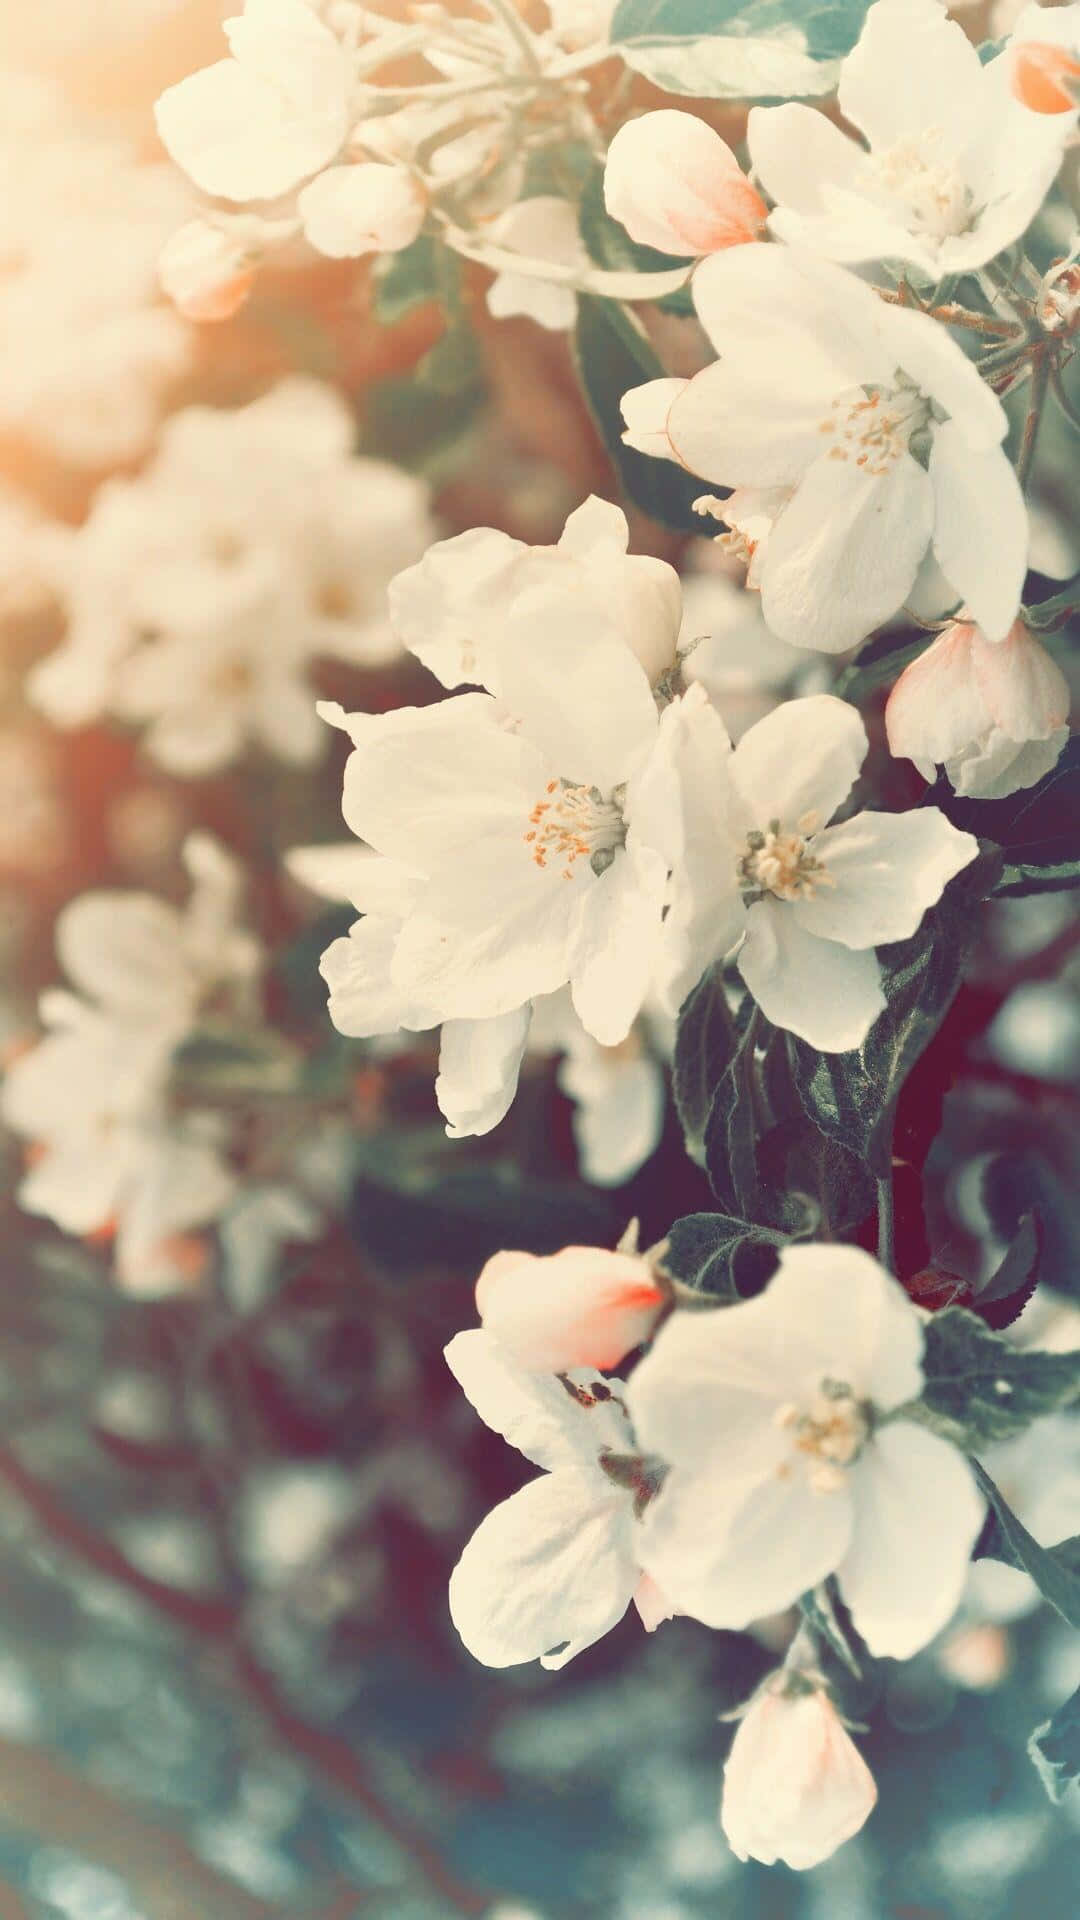 White Flowers On A Branch With Sunlight Shining Through